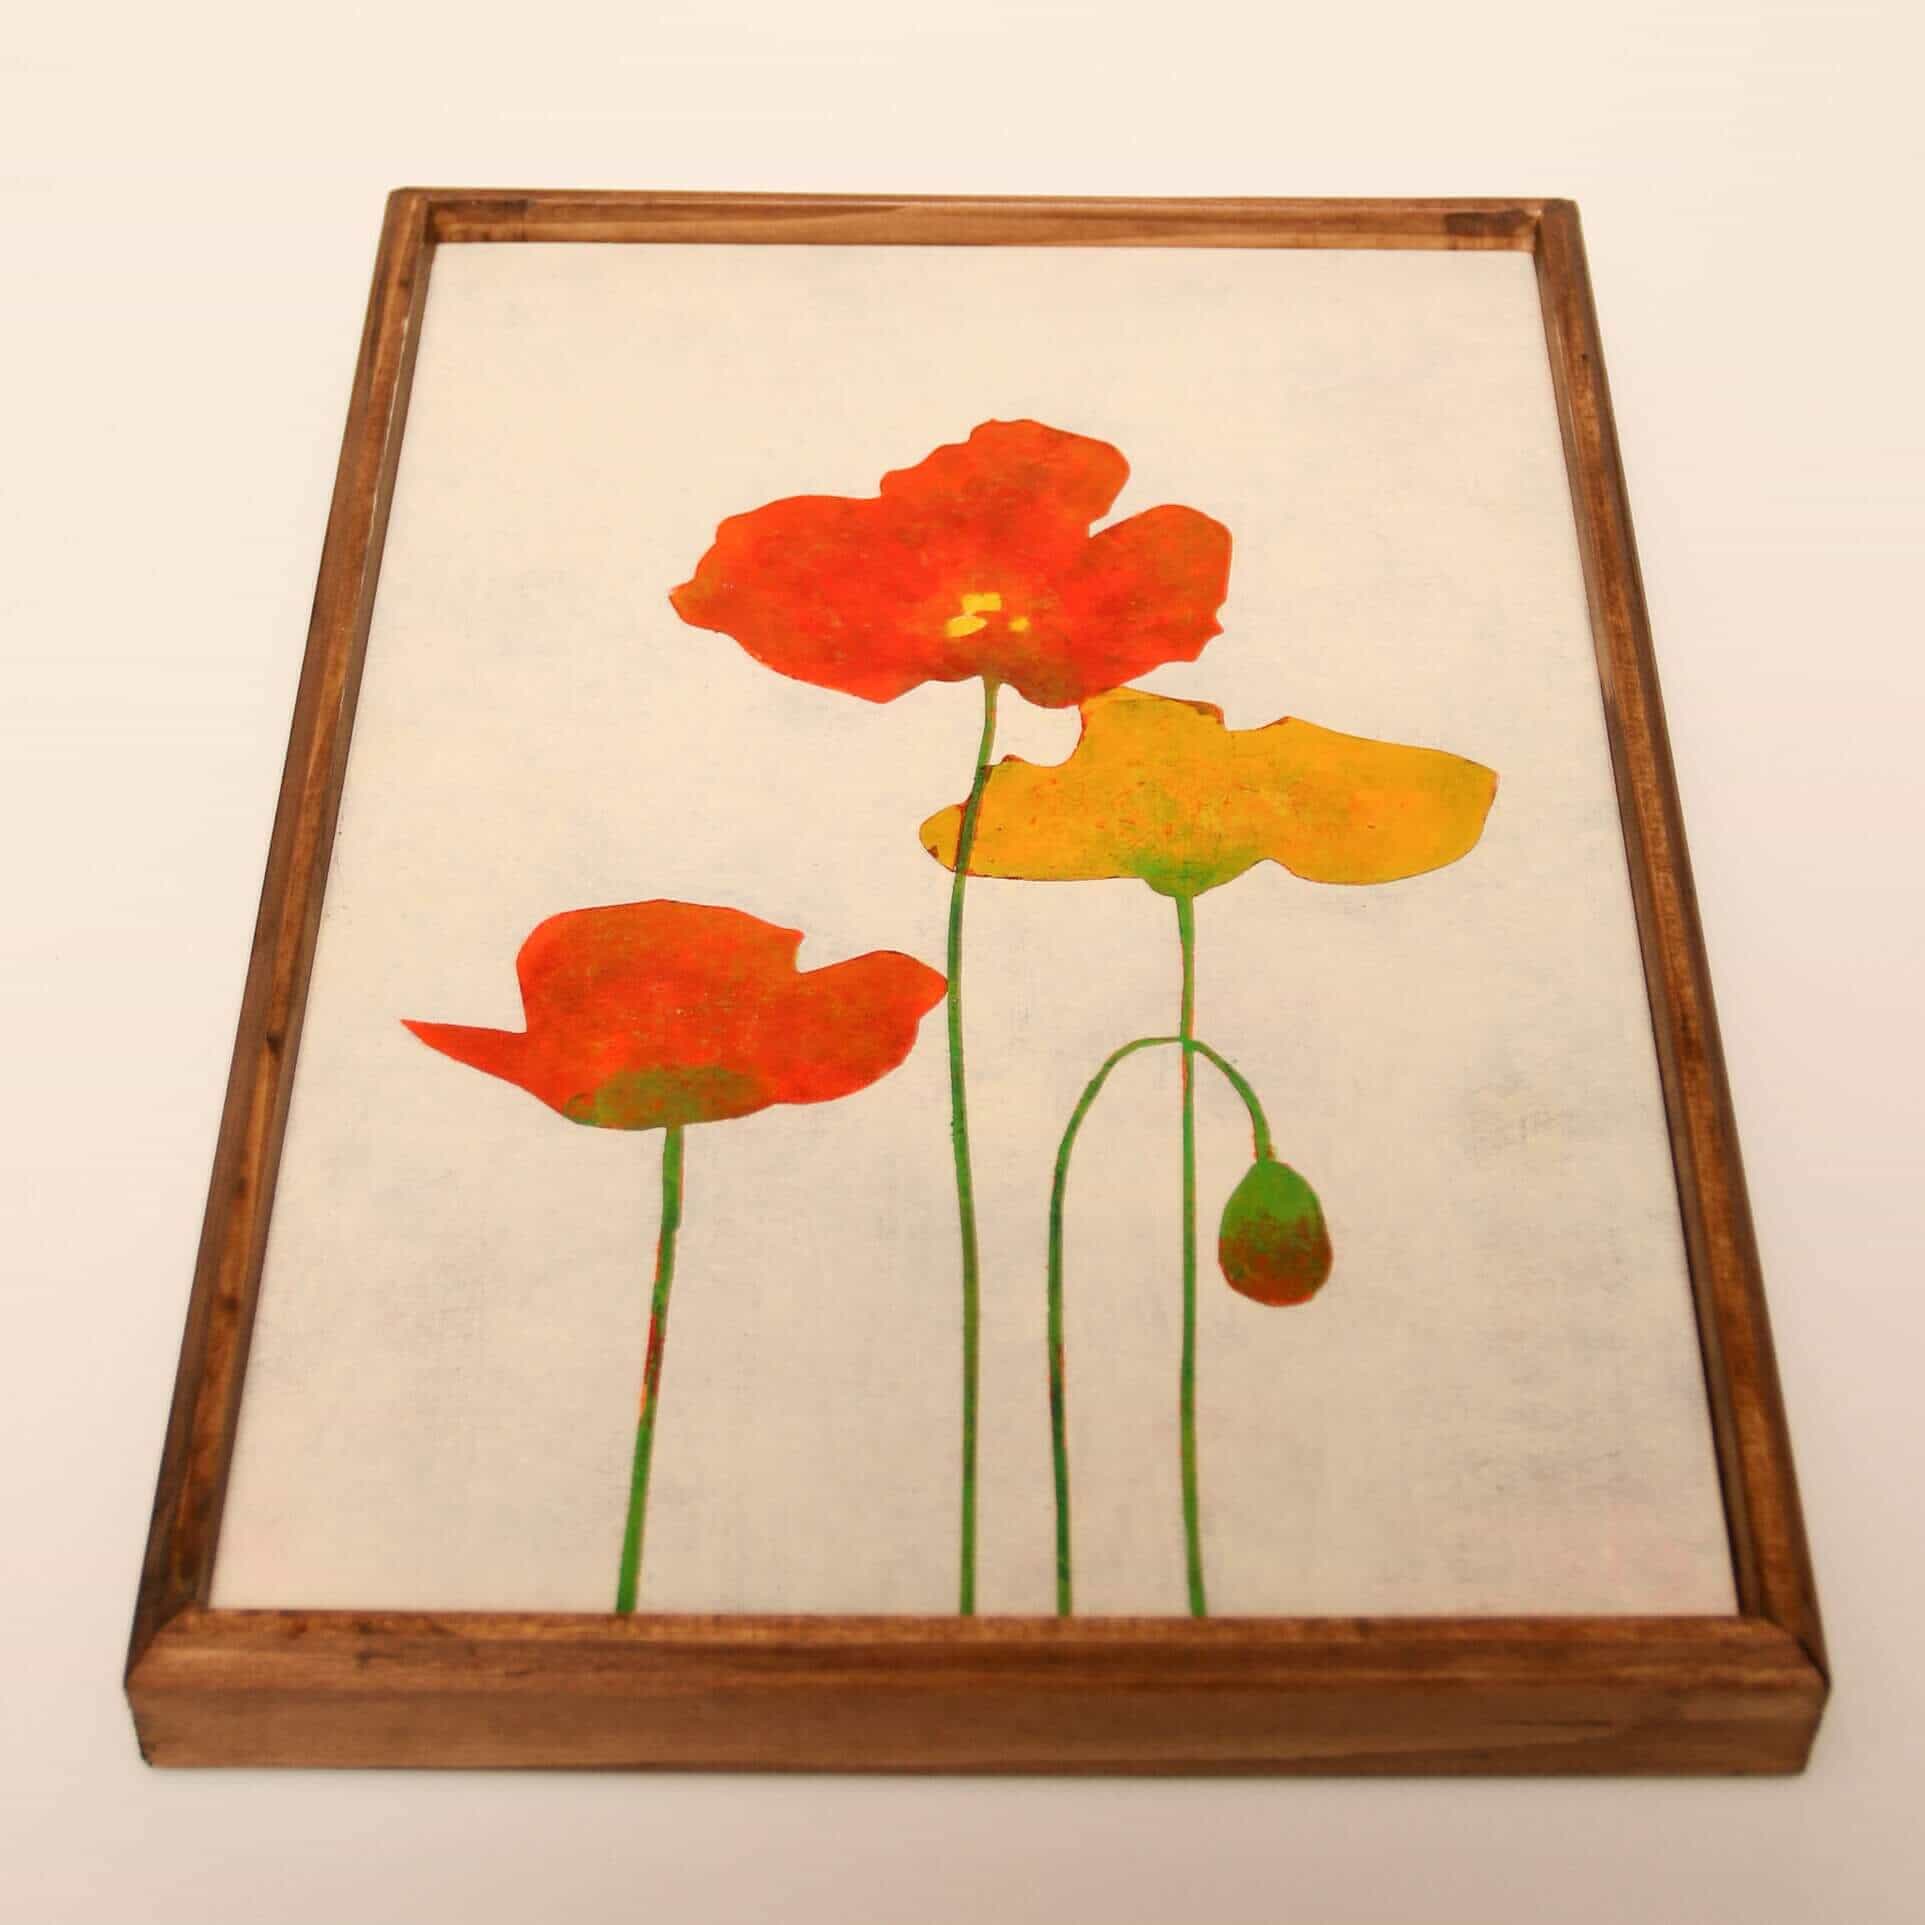 Orange and yellow poppies_A No.186-6